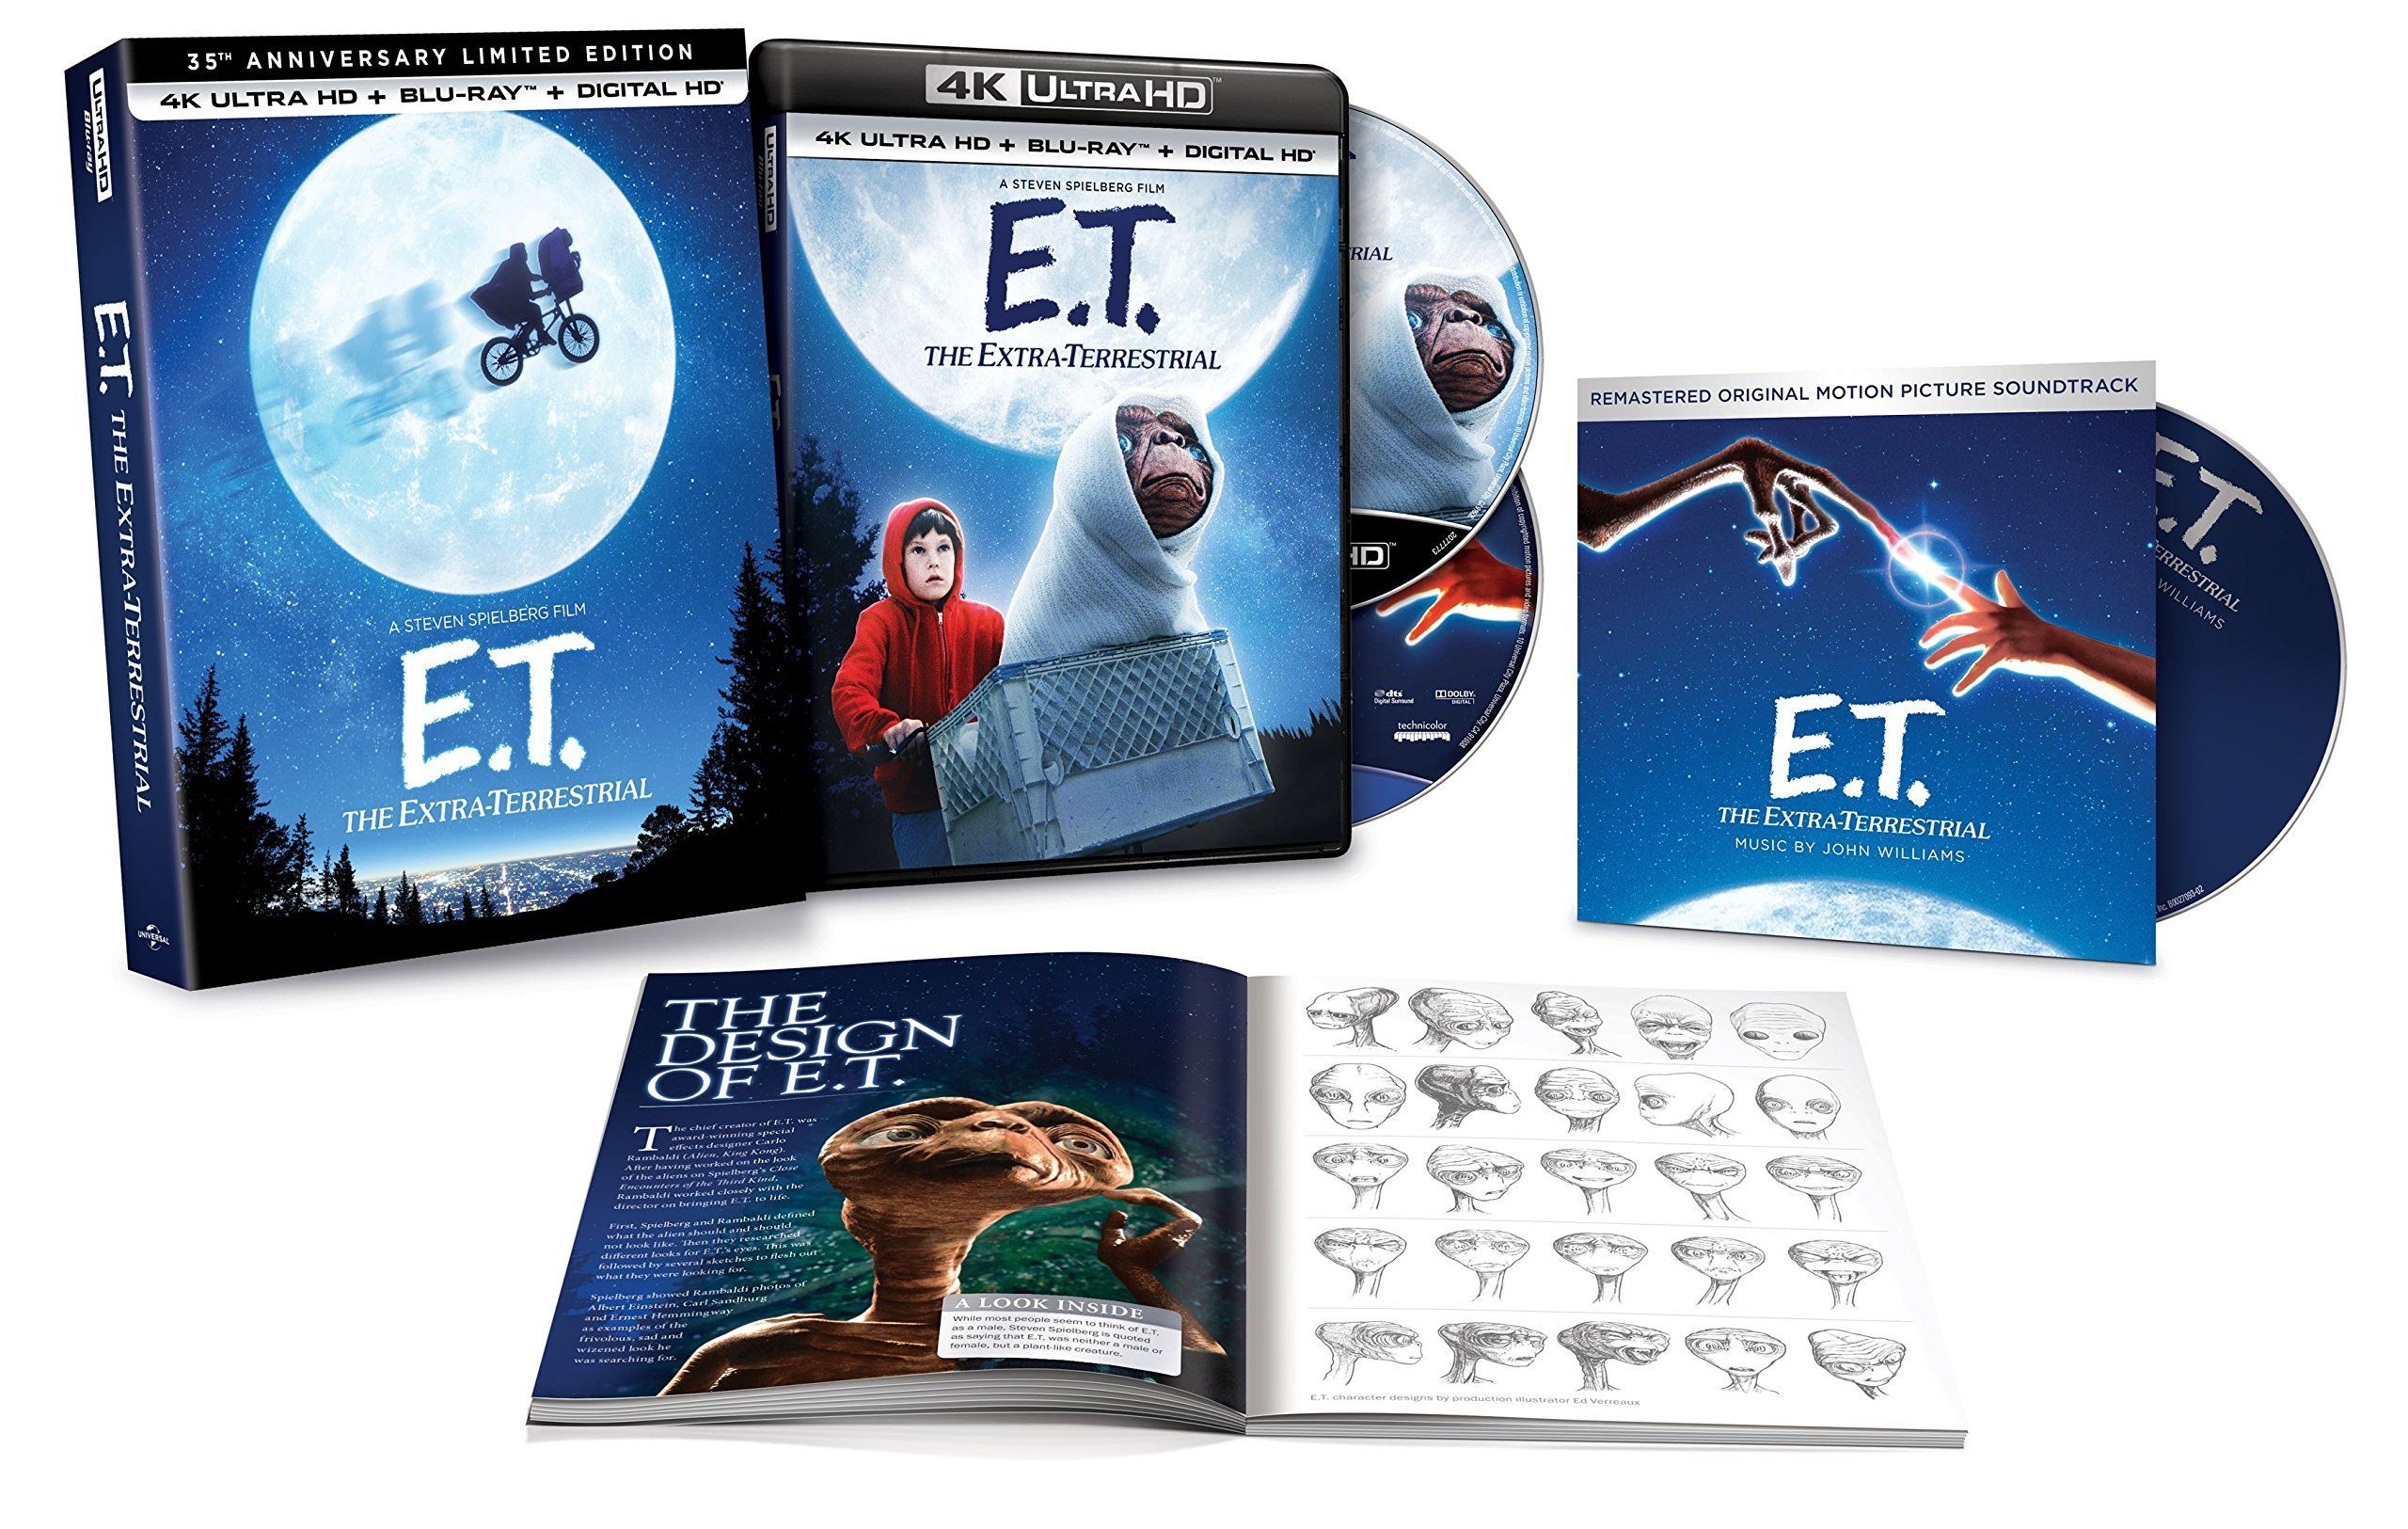 4K UHD Blu-ray Set Review: 'E.T.: The Extra-Terrestrial – 35th